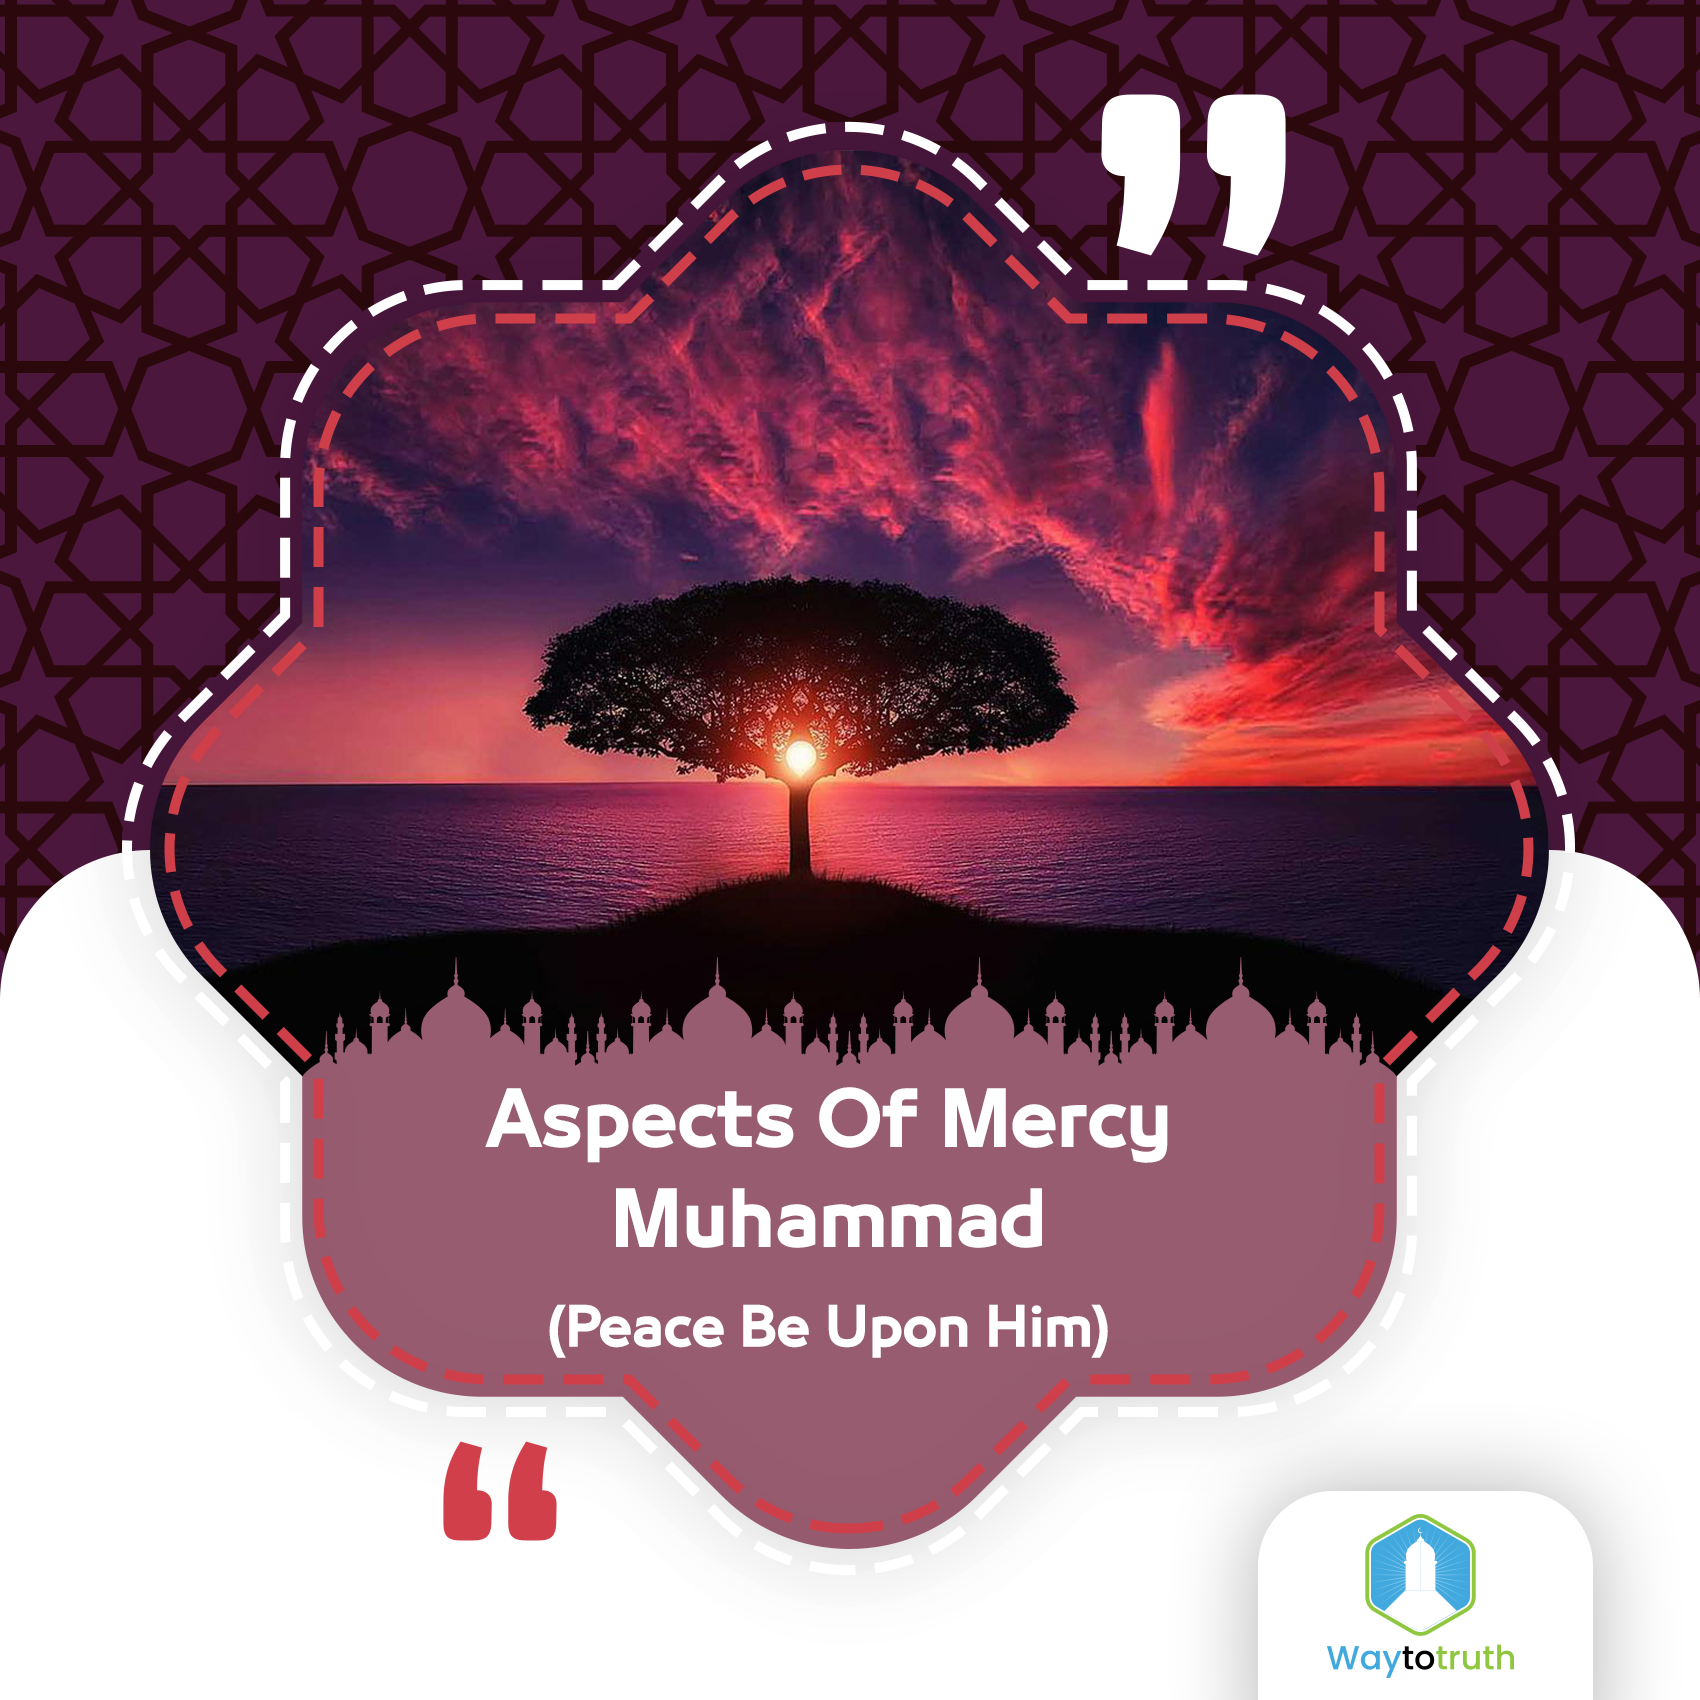 Aspects of Mercy Muhammad (Peace be upon him)